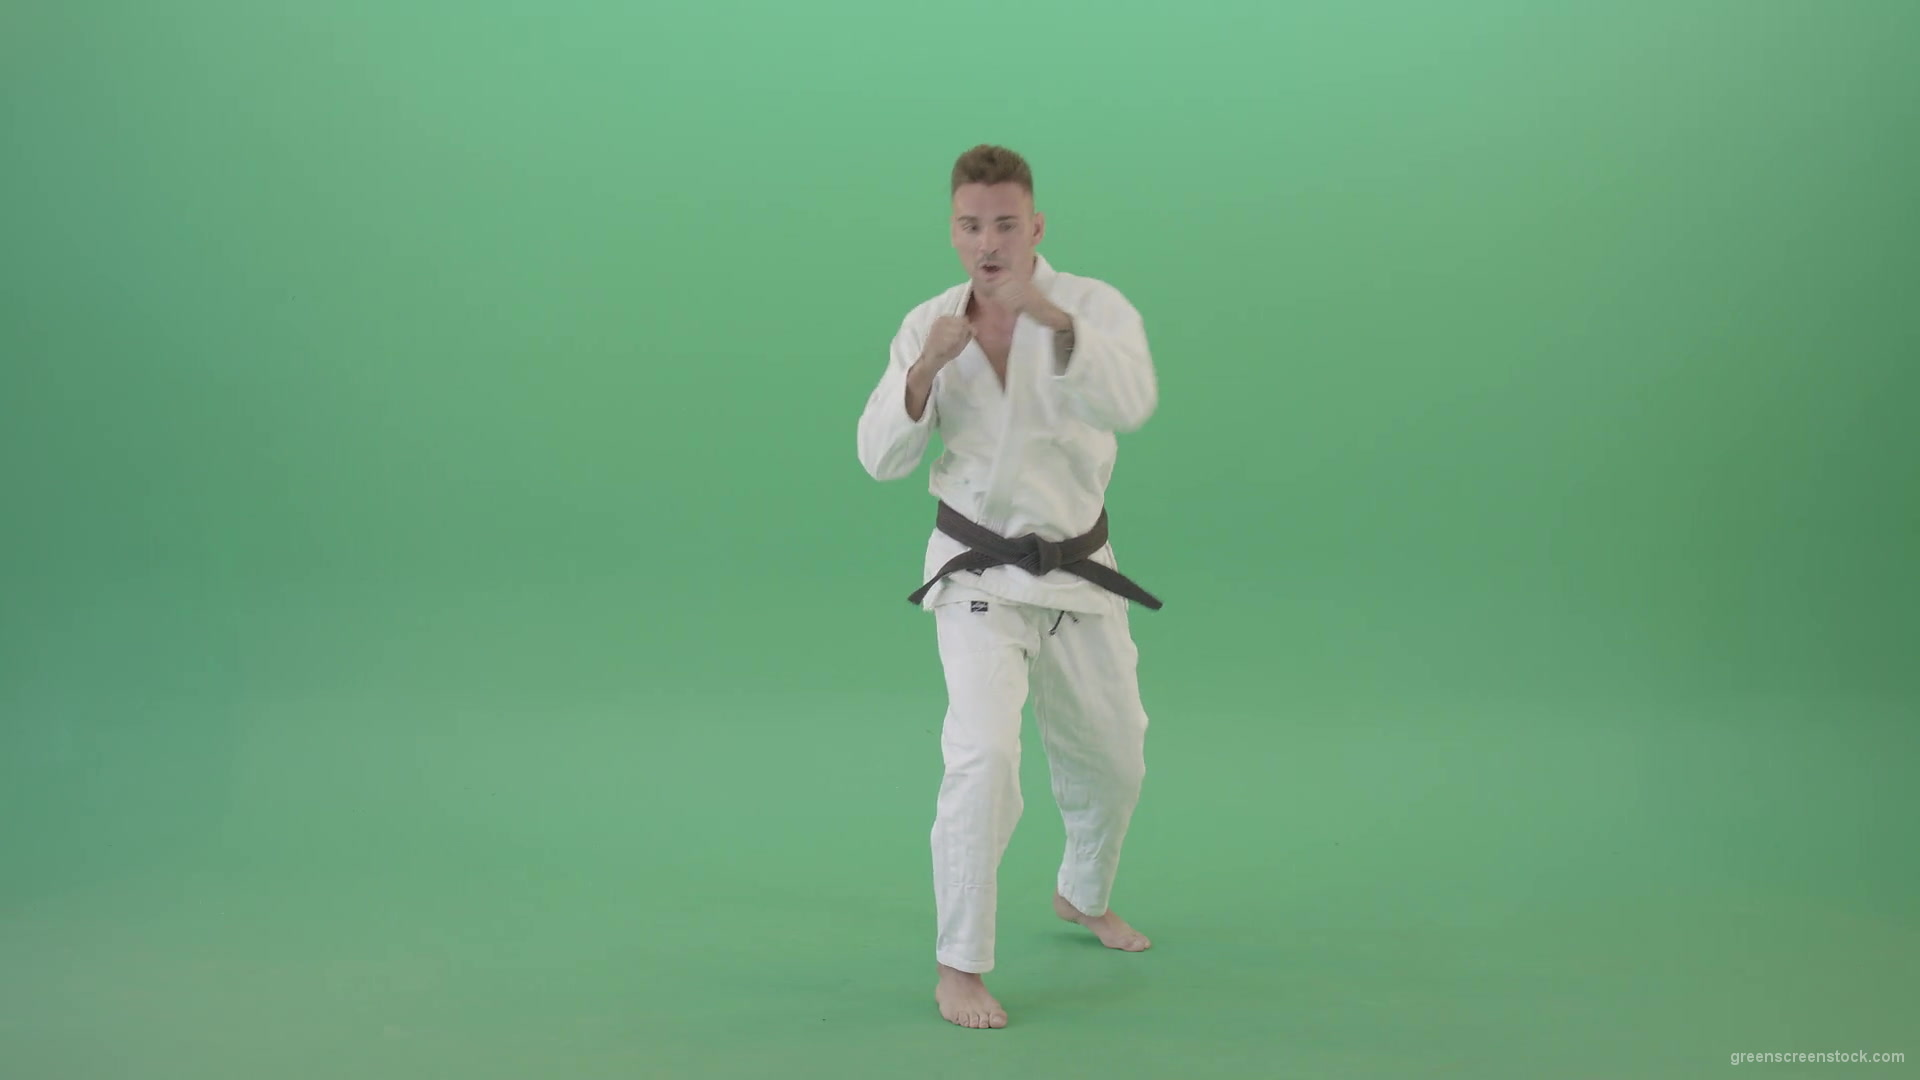 Karate-Man-boxing-making-punch-front-view-isolated-on-green-screen-1920_002 Green Screen Stock